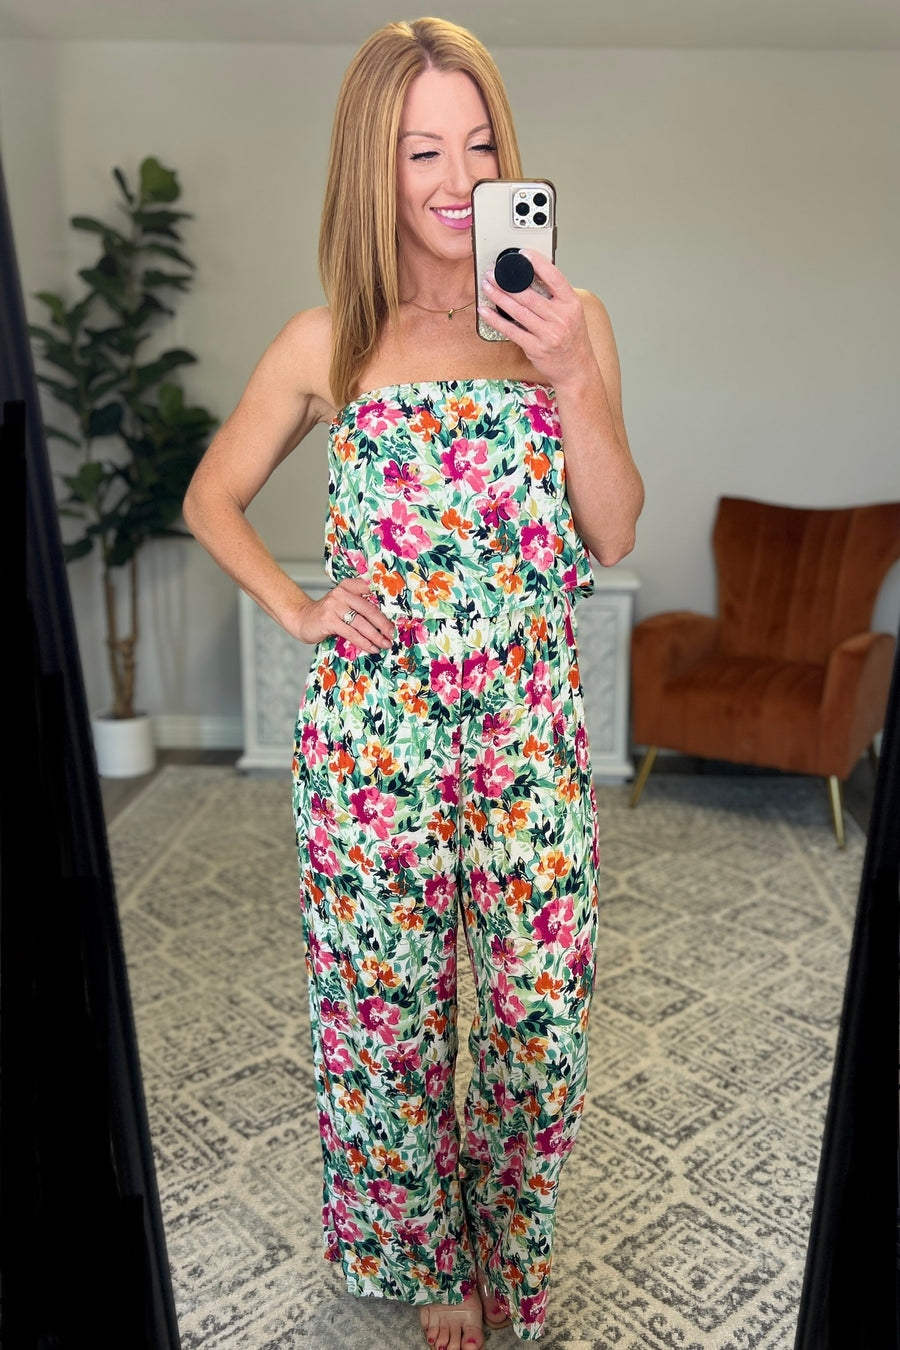 Life of the Party Floral Jumpsuit in Green